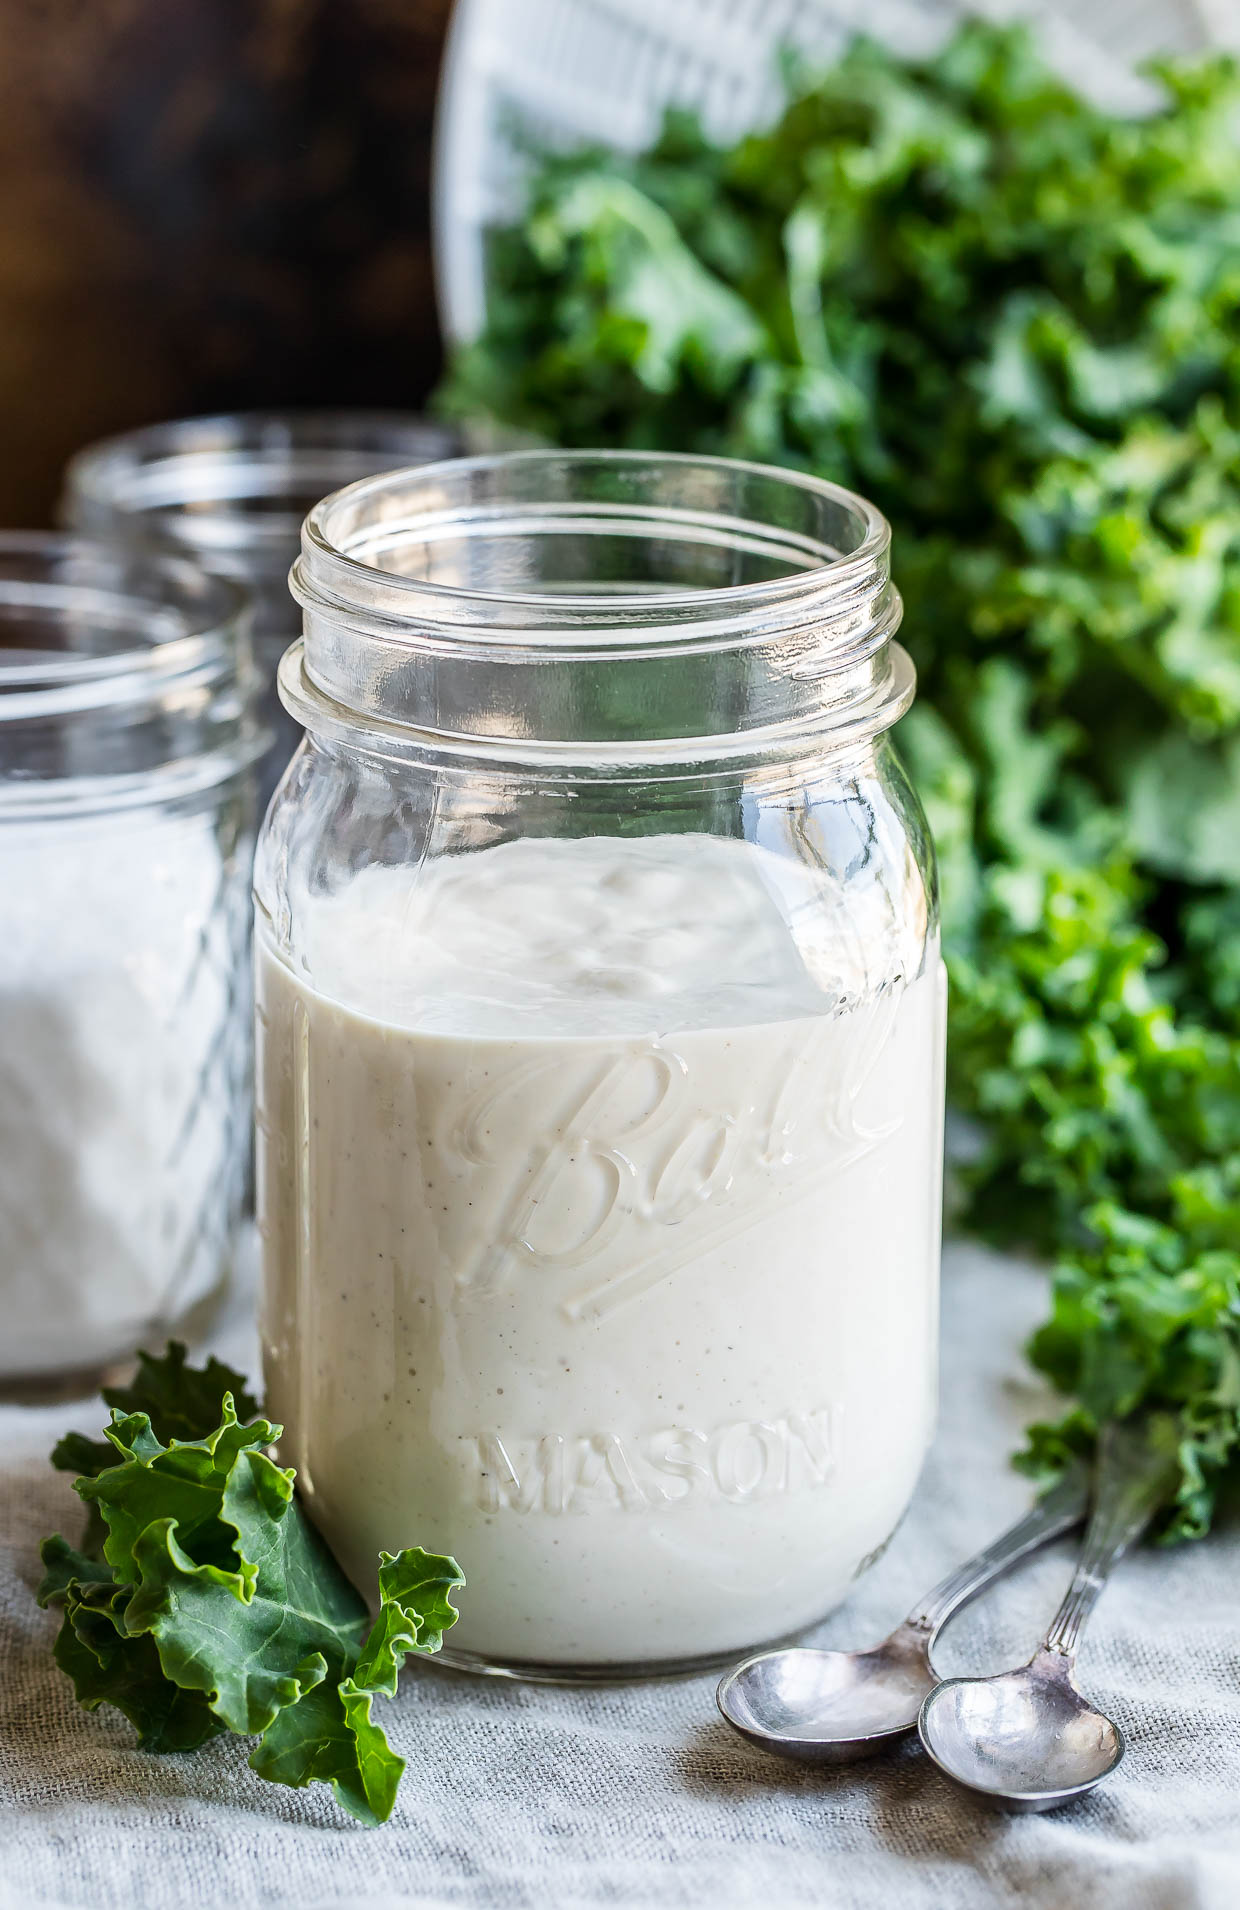 This homemade Caesar dressing is hands-down our favorite! It's thick, creamy, and full of flavor, perfect for a rockin' Caesar salad with all the fixin's.